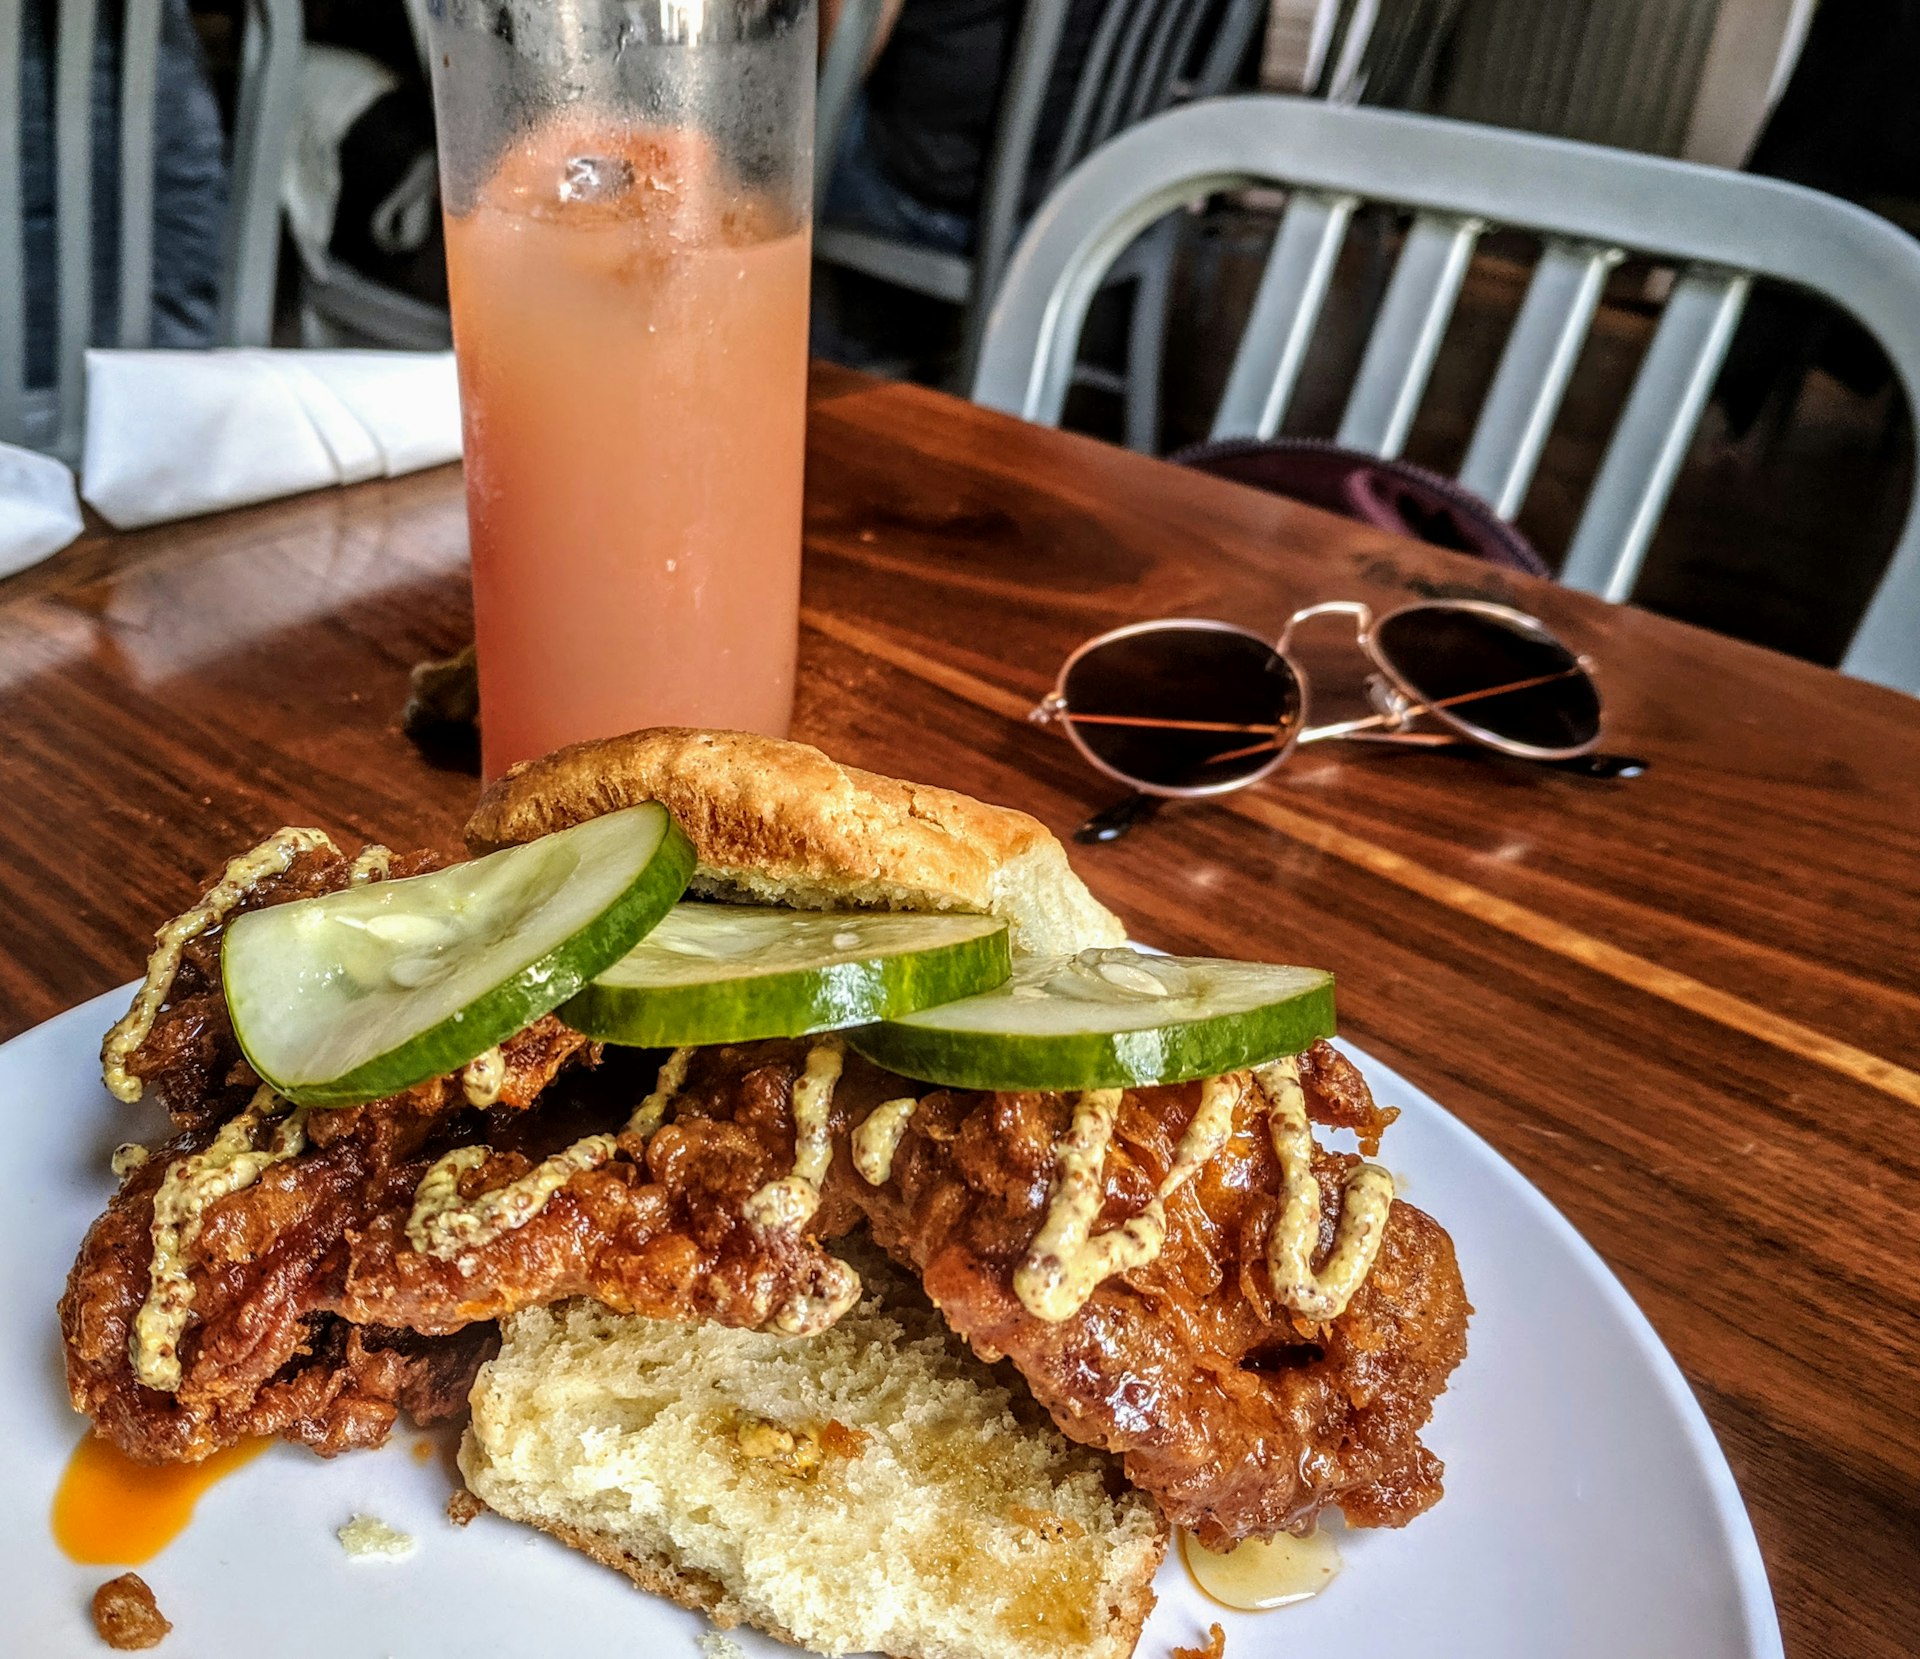 A plate full of food including hot chicken on bread with gherkins on top, and an orange-colored smoothie